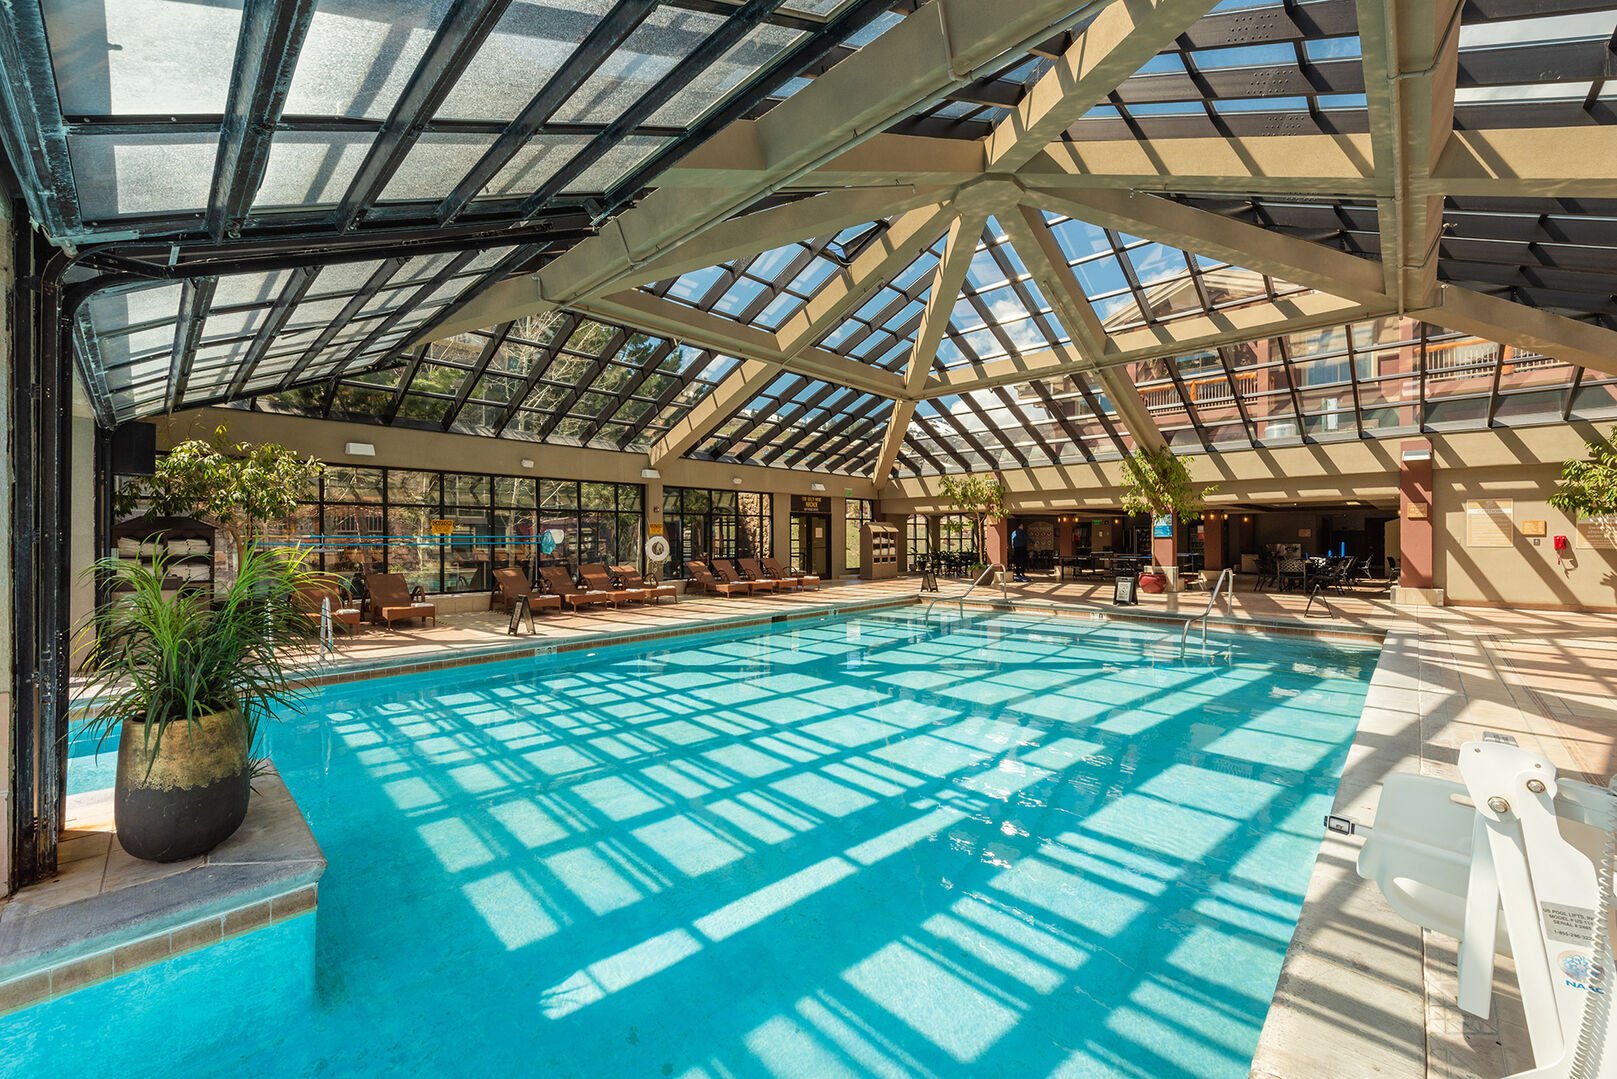 Main indoor / outdoor pool nicely heated year round